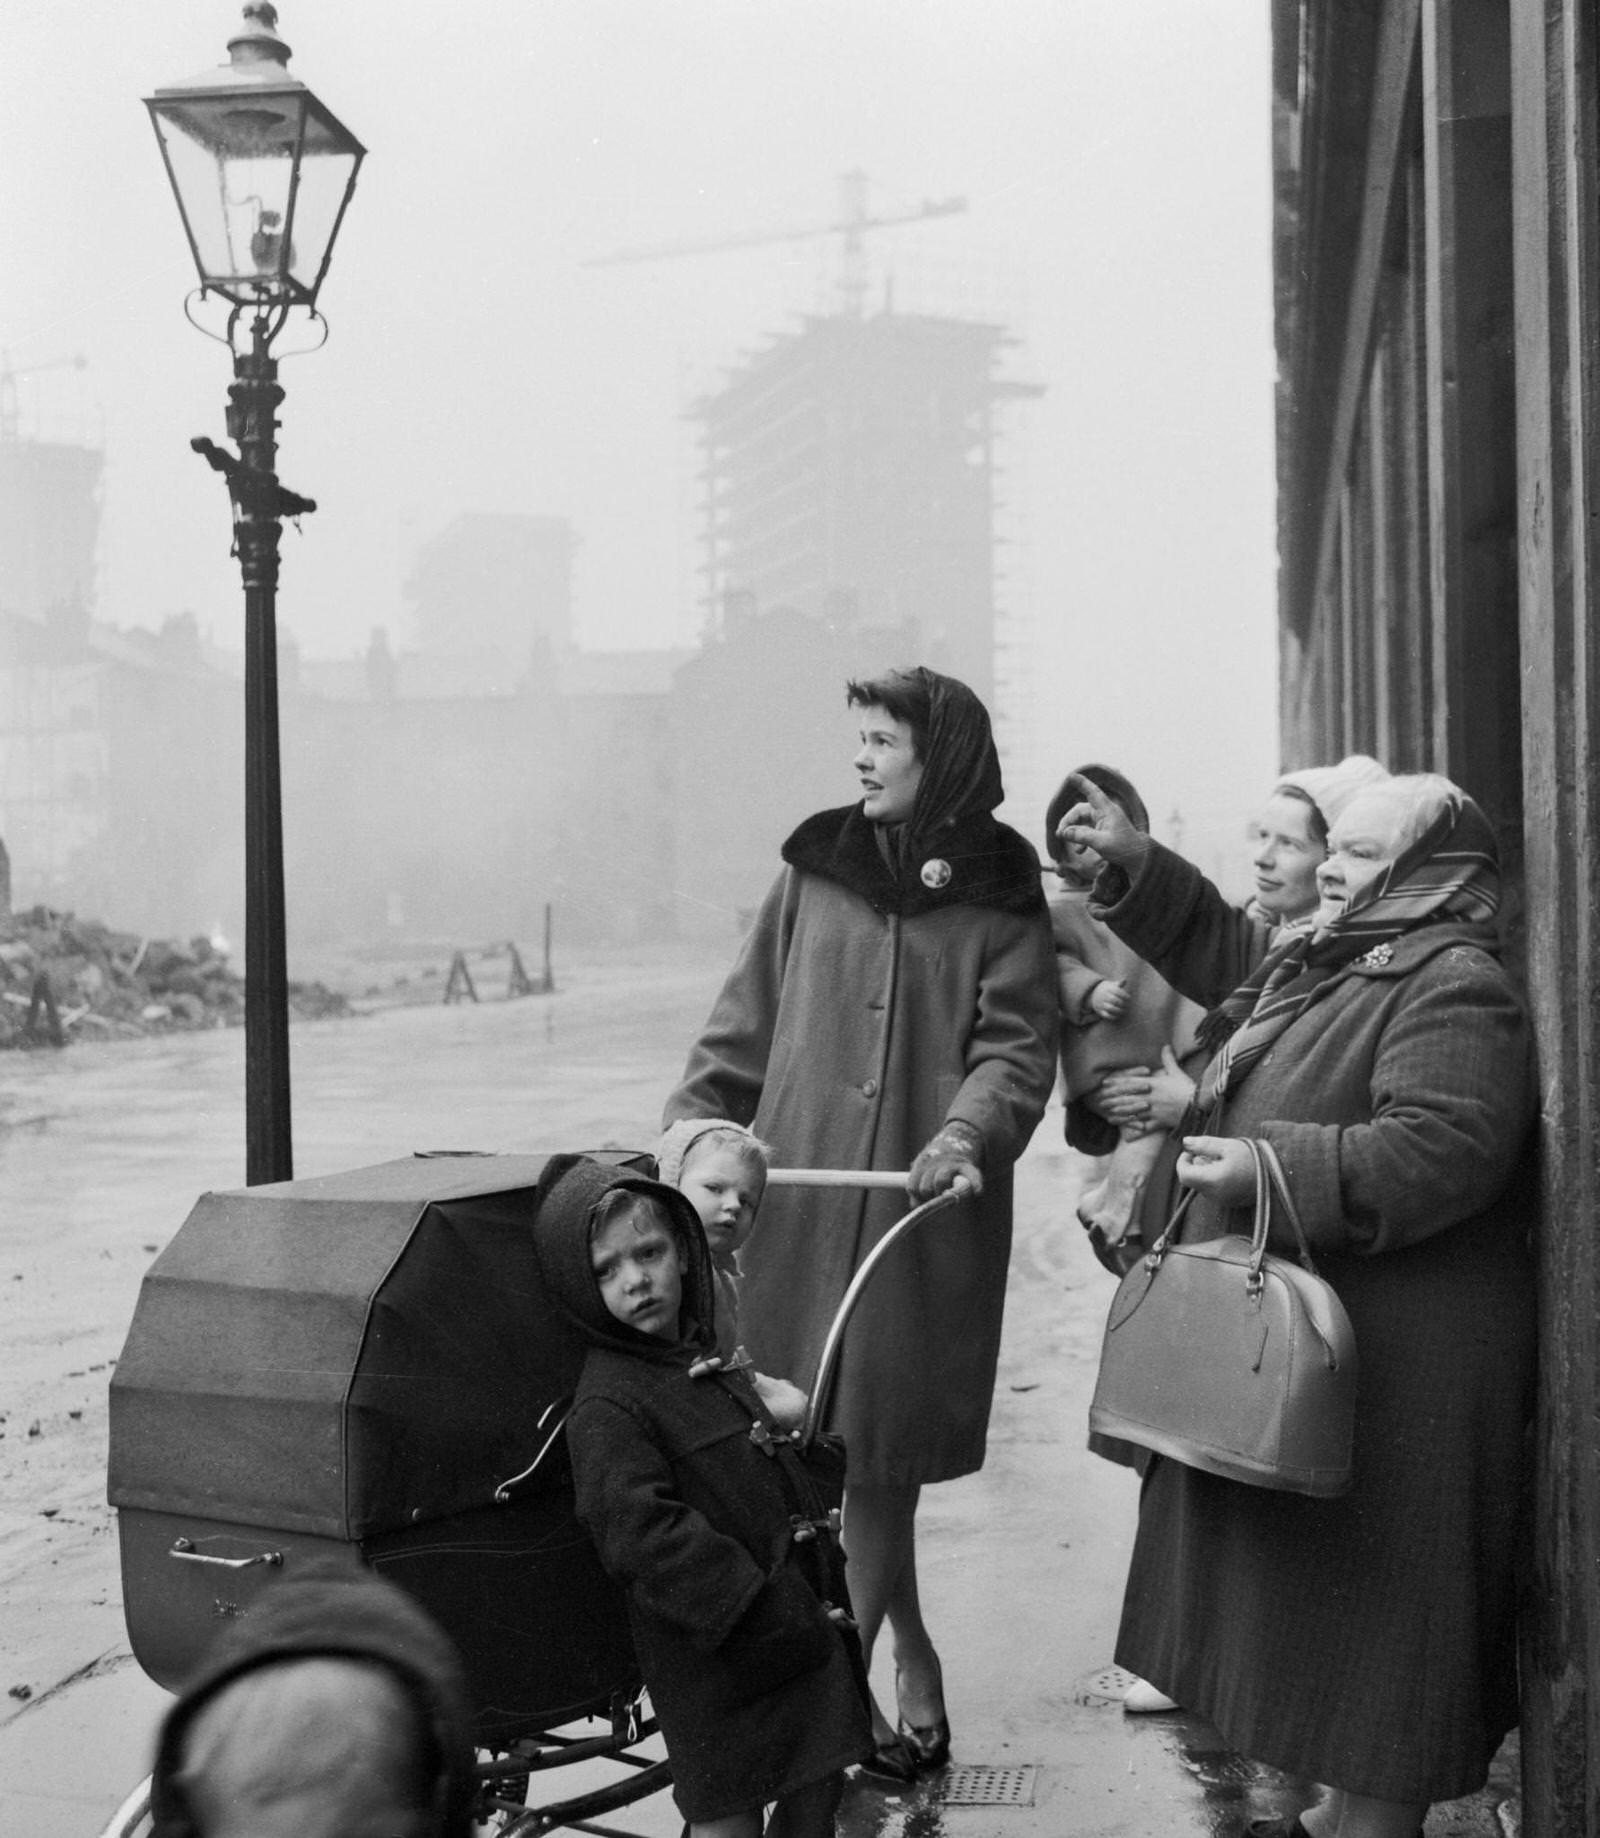 A group of women and children stop to look at across the street where sections of the notoriously squalid slums known as the Gorbals have been demolished, 1962